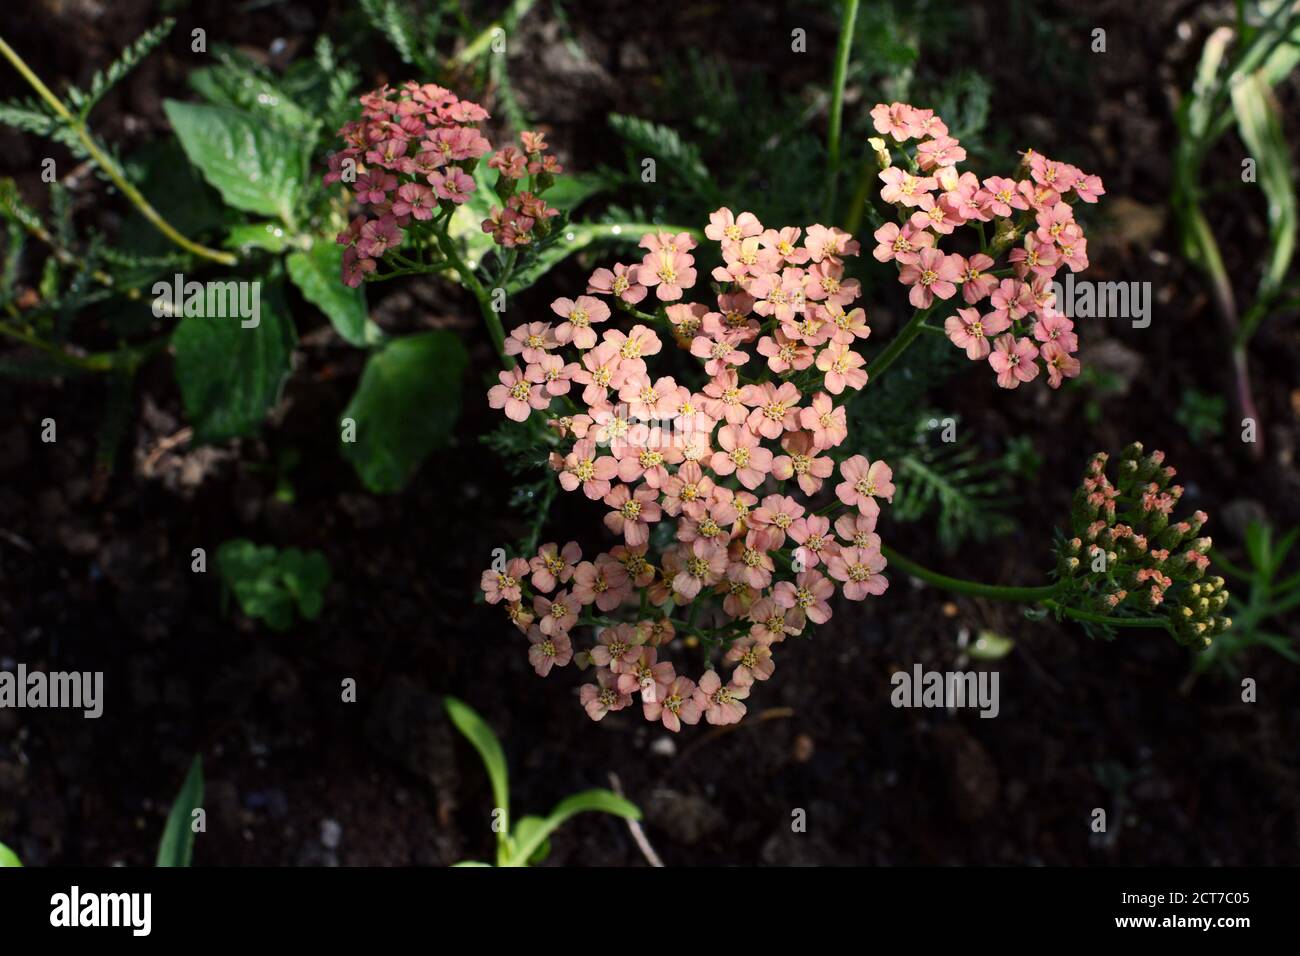 Yarrow - Achillea Appleblossom - with small pink flowers, growing in dappled light in a rural flower garden Stock Photo